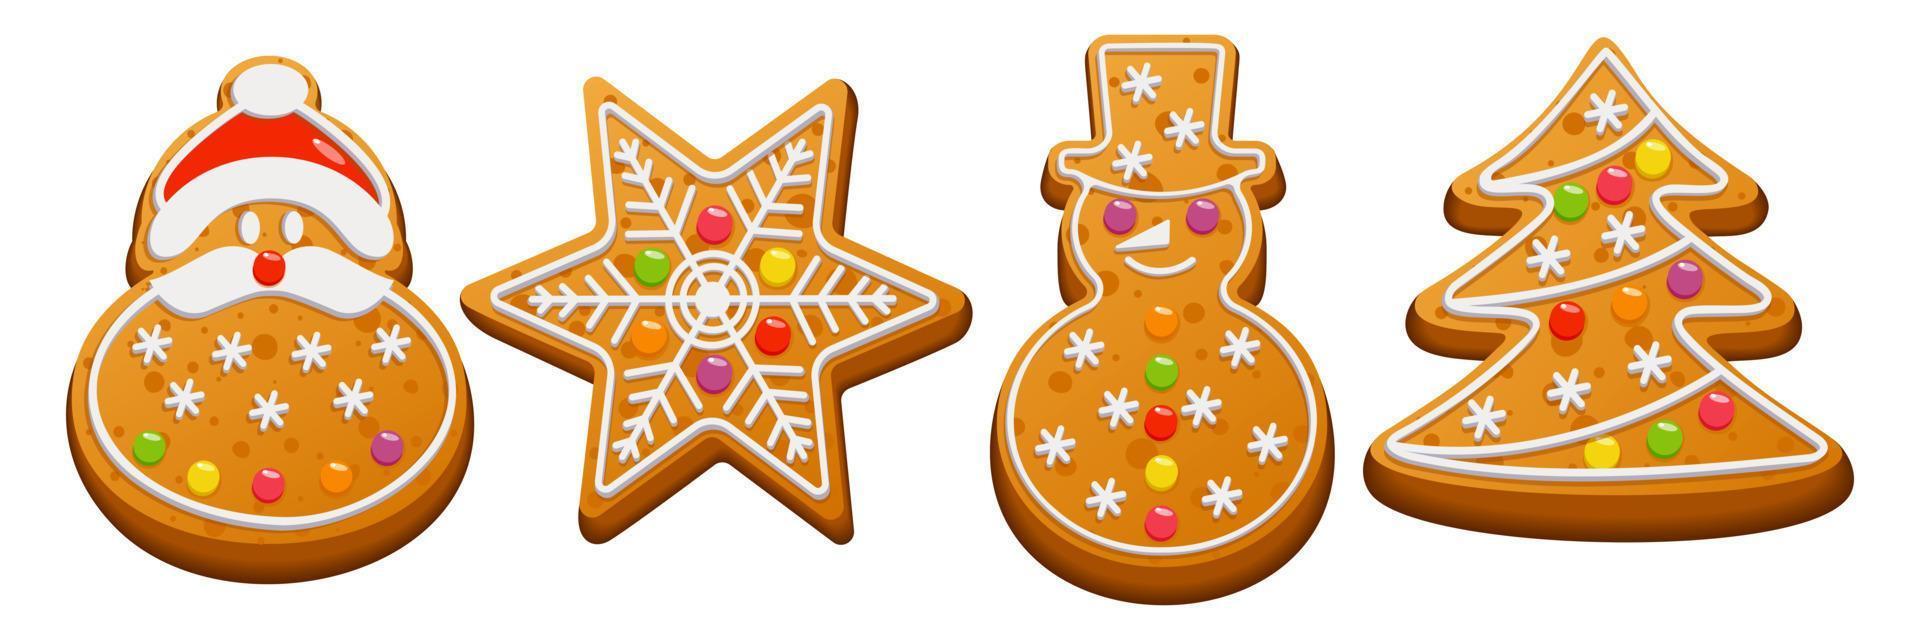 Christmas gingerbread set. Sweet homemade winter cookies. Gingerbread cookies with sugar icing and marmalade on a white background. Vector illustration.